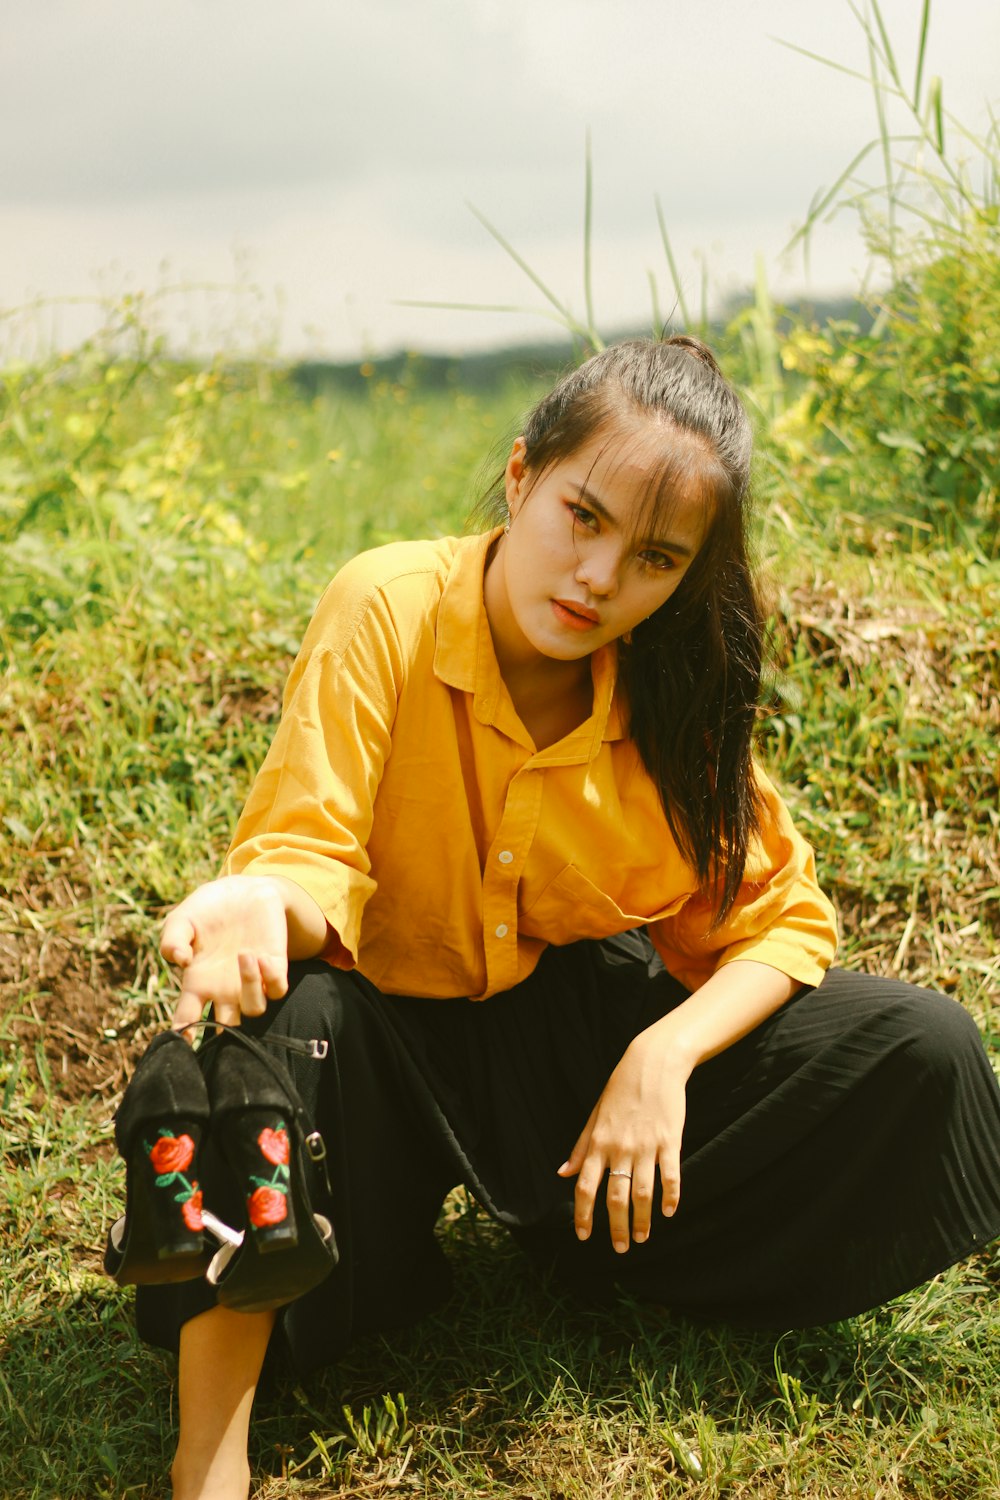 woman in yellow jacket and black pants sitting on green grass during daytime